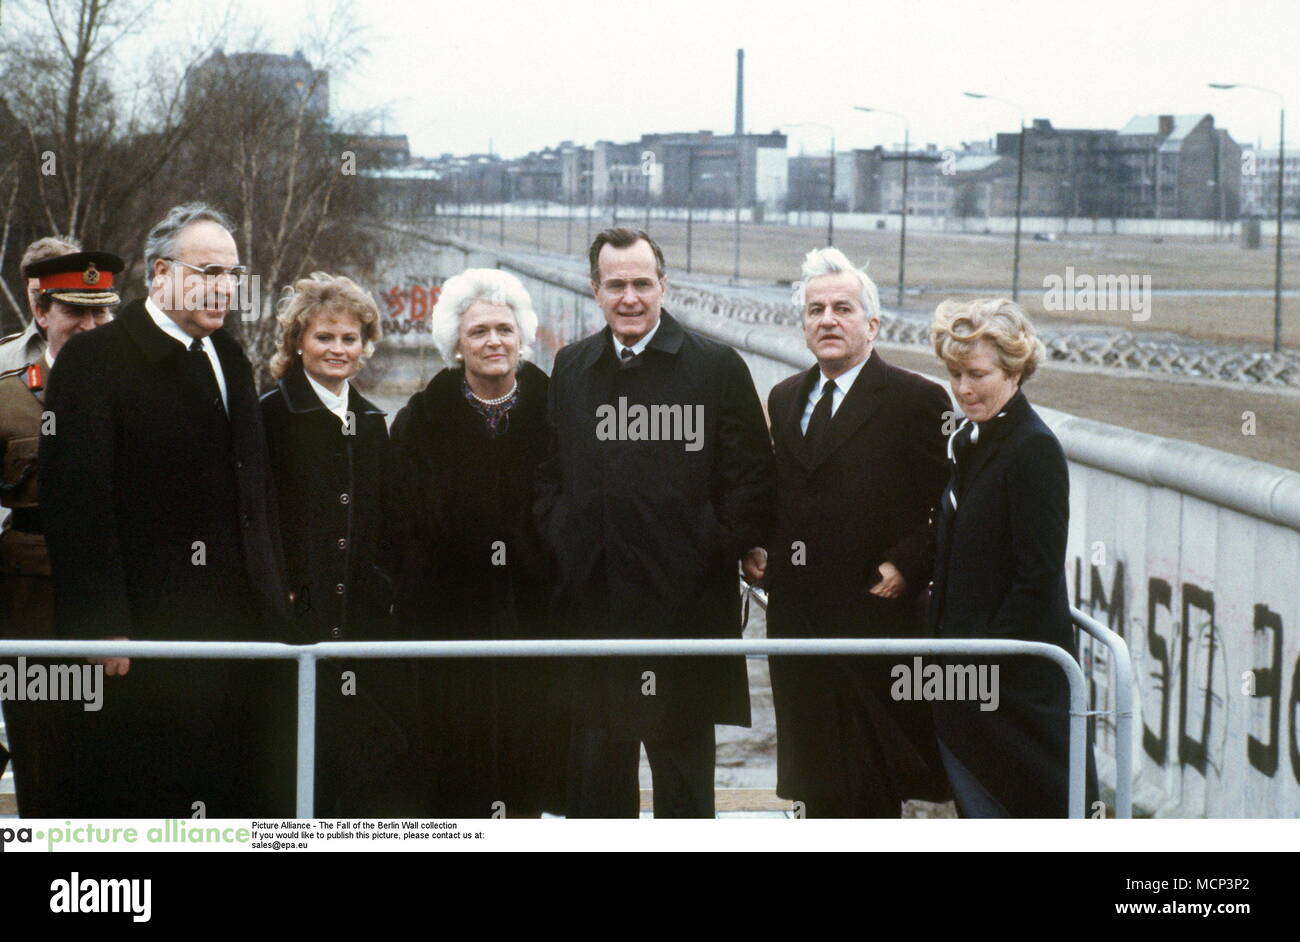 ***FILE PHOO*** BARBARA BUSH HAS PASSED AWAY (1925-2018) ARCHIVE - L-R: The West German chancellor Helmut Kohl, his wife Hannelore, Barbara Bush, her husband, American vice president George Bush, the mayor of Berlin Richard von Weizsaecker and his wife Marianne near the wall dividing Berlin, Germany, 31 January 1983. The former German chancellor Helmut Kohl died at the age of 87 on the 16 June. The news was shared with the German Press Agency by Kohl's lawyer Holthoff-Pfoertner. Photo: Konrad Giehr/dpa /MediaPunch ***FOR USA ONLY*** Stock Photo